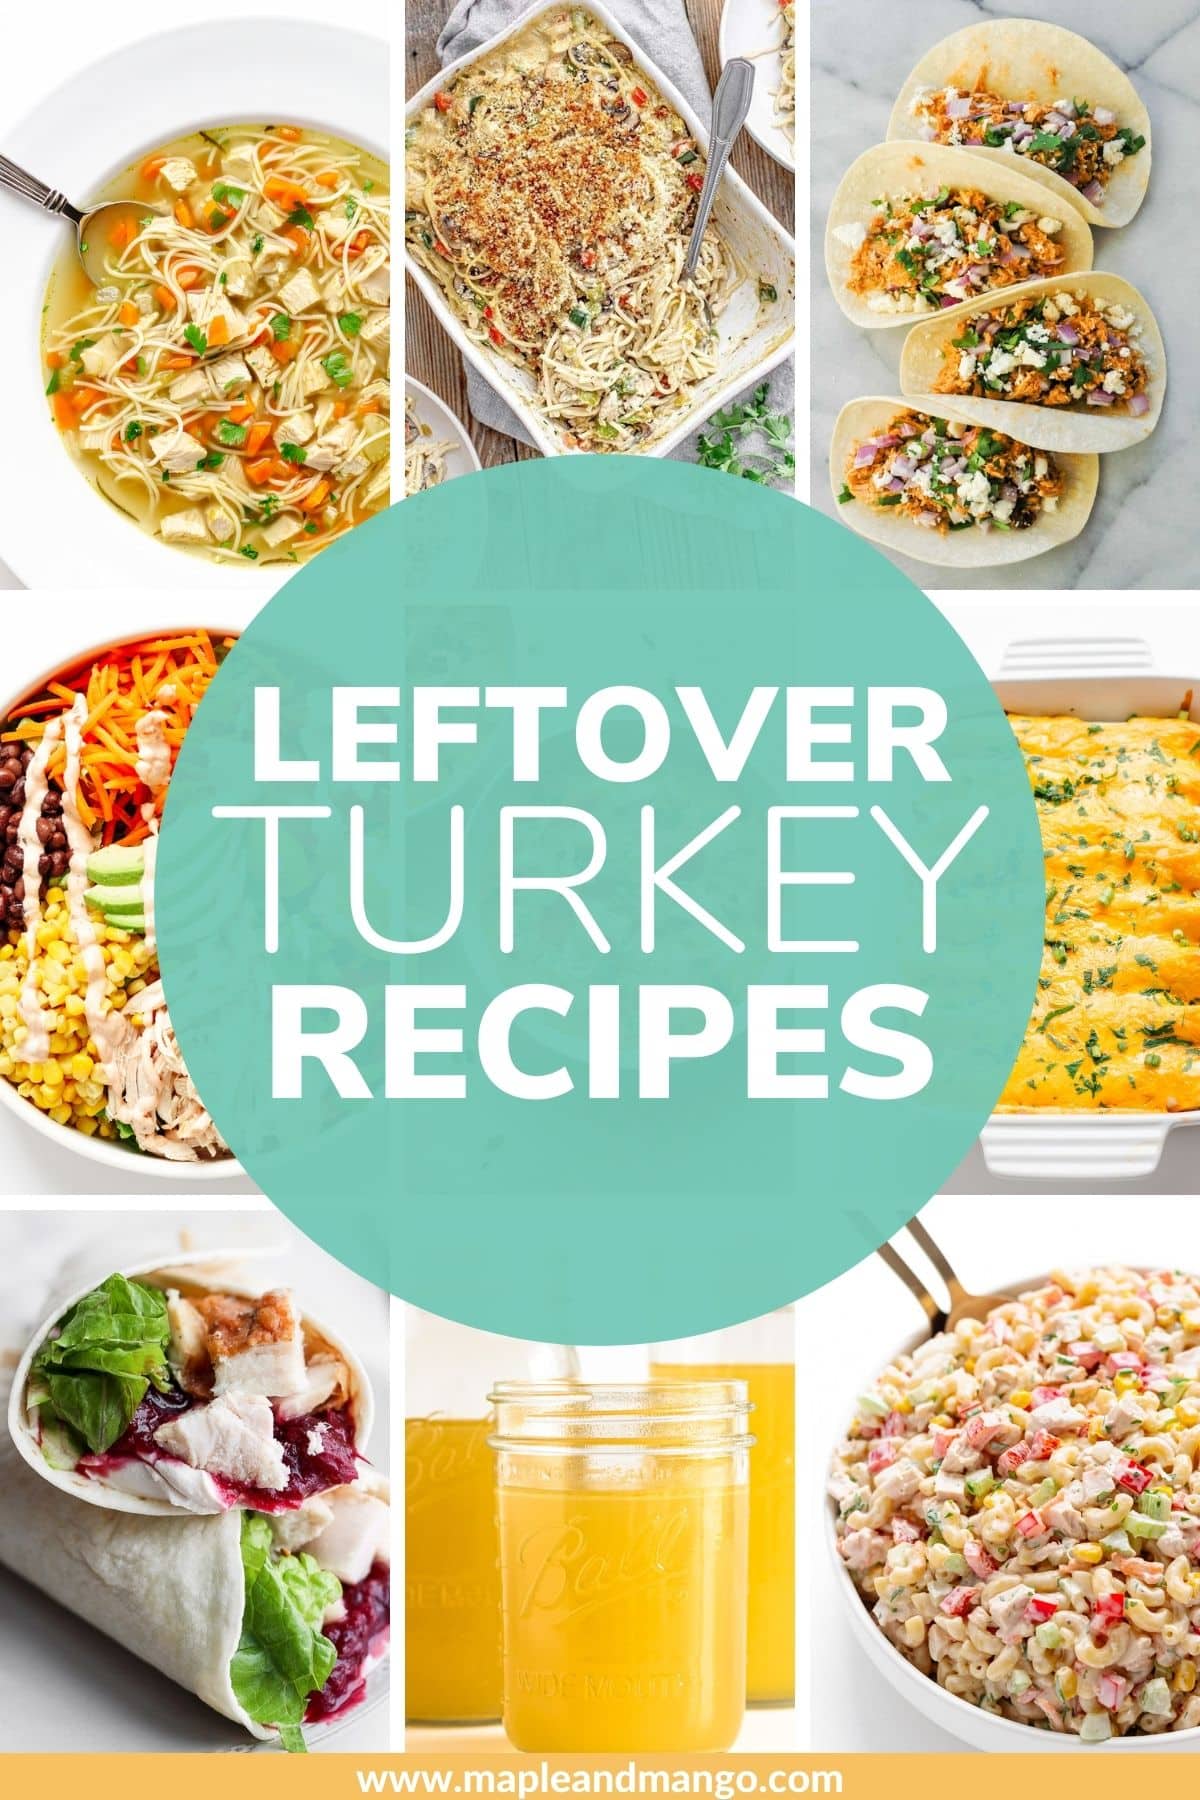 Photo collage of recipes that use turkey leftovers with text overlay "Leftover Turkey Recipes".